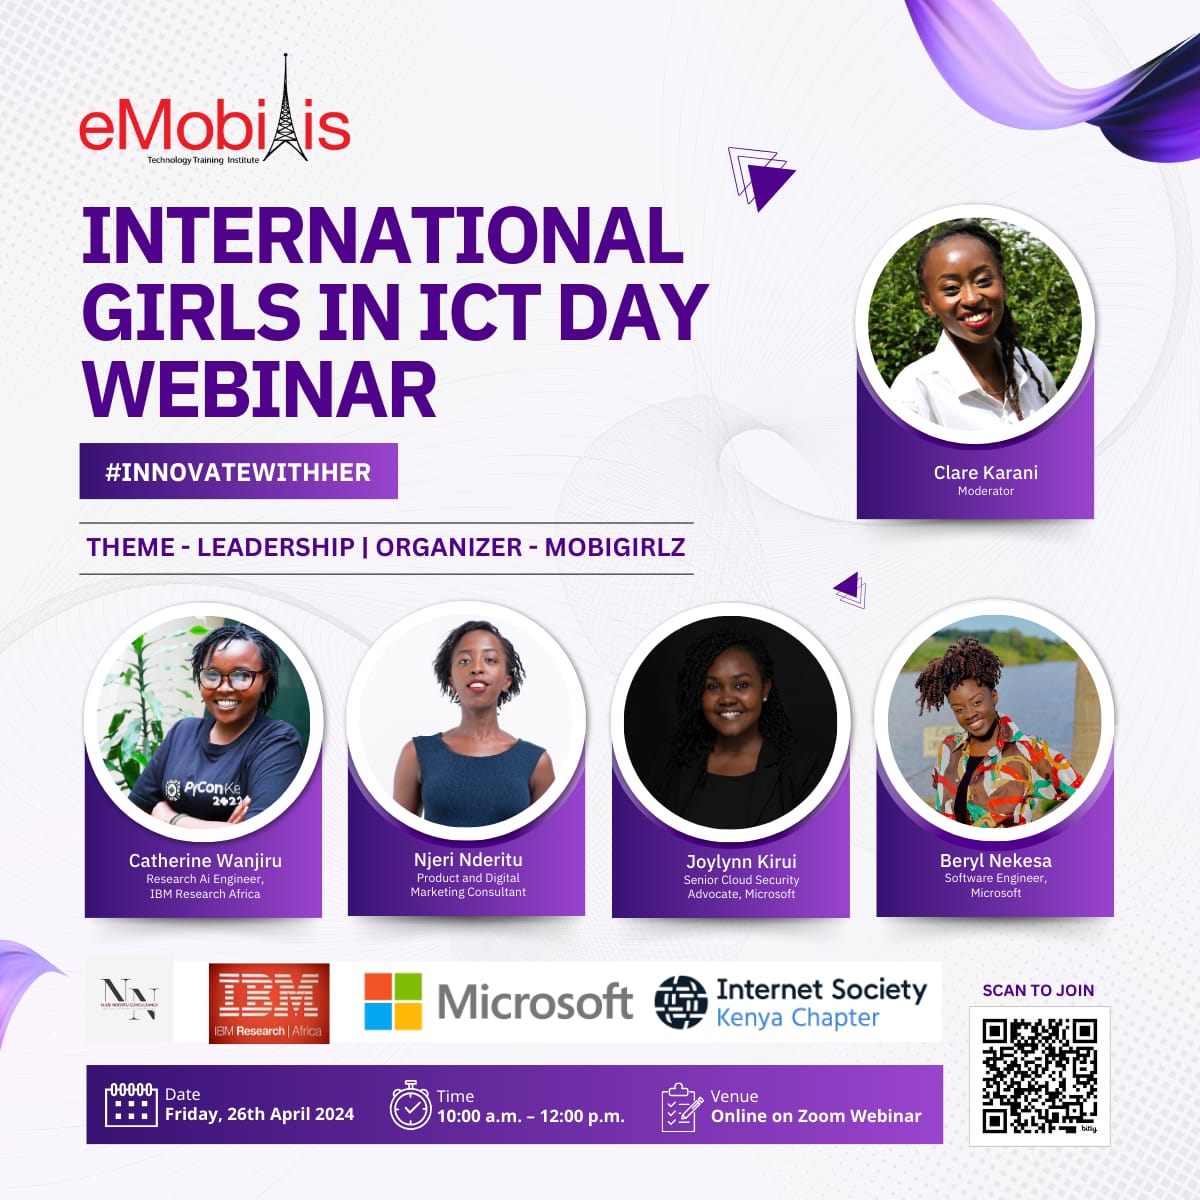 @ISOC_Kenya and @eMobilis invite you to participate in the zoom webinar on the celebration of International Girls in ICT Day on Friday, 26th April 2024 from 10:00 a.m. to 12:00 p.m. Register here: rb.gy/4efnb8. @internetsociety @ISOC_Foundation @ICANN